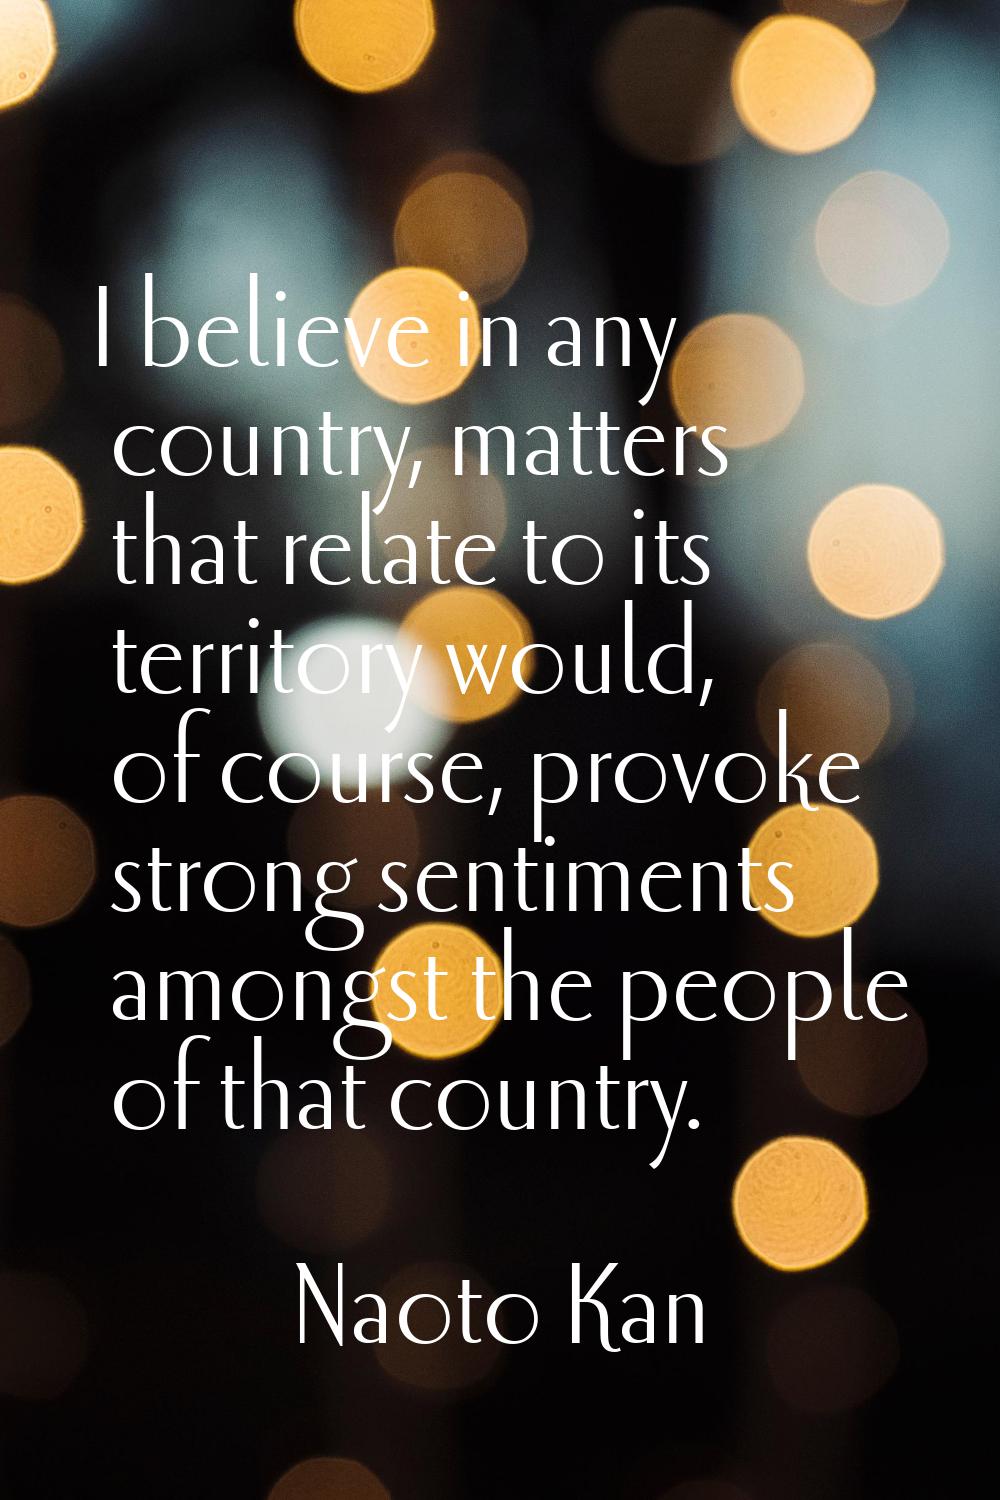 I believe in any country, matters that relate to its territory would, of course, provoke strong sen